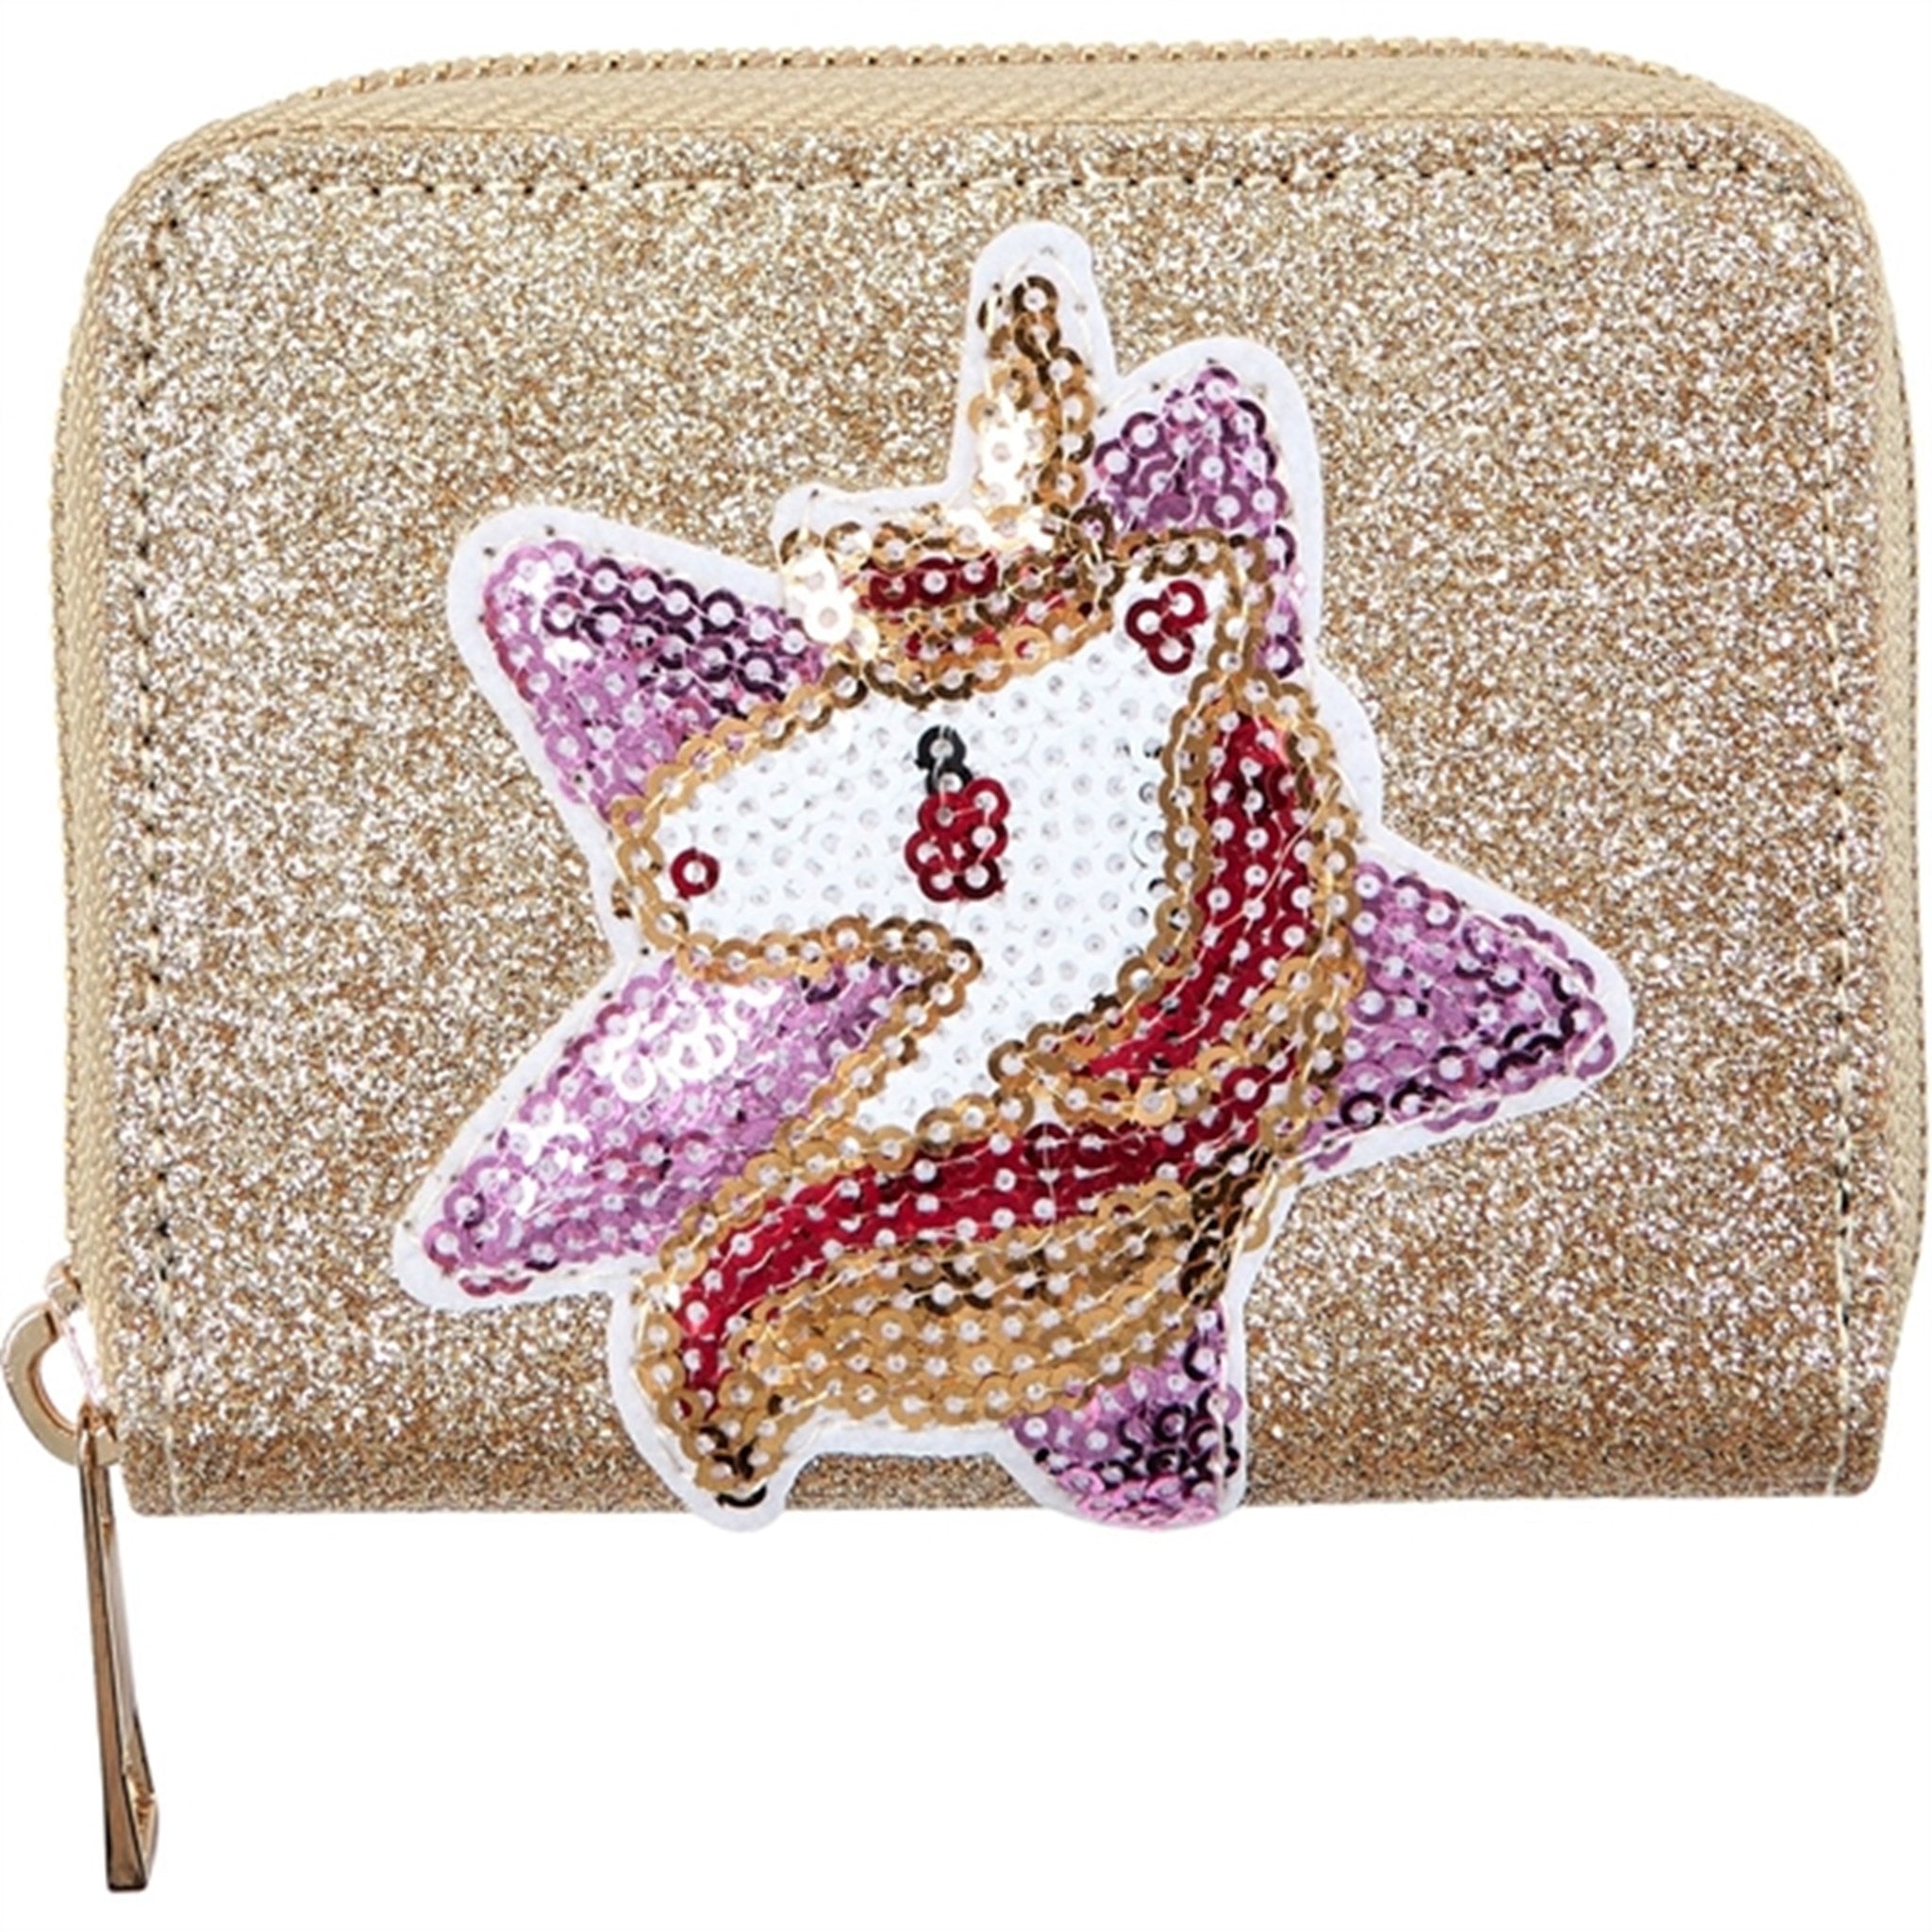 Petit By Sofie Schnoor Champagne Wallet 4